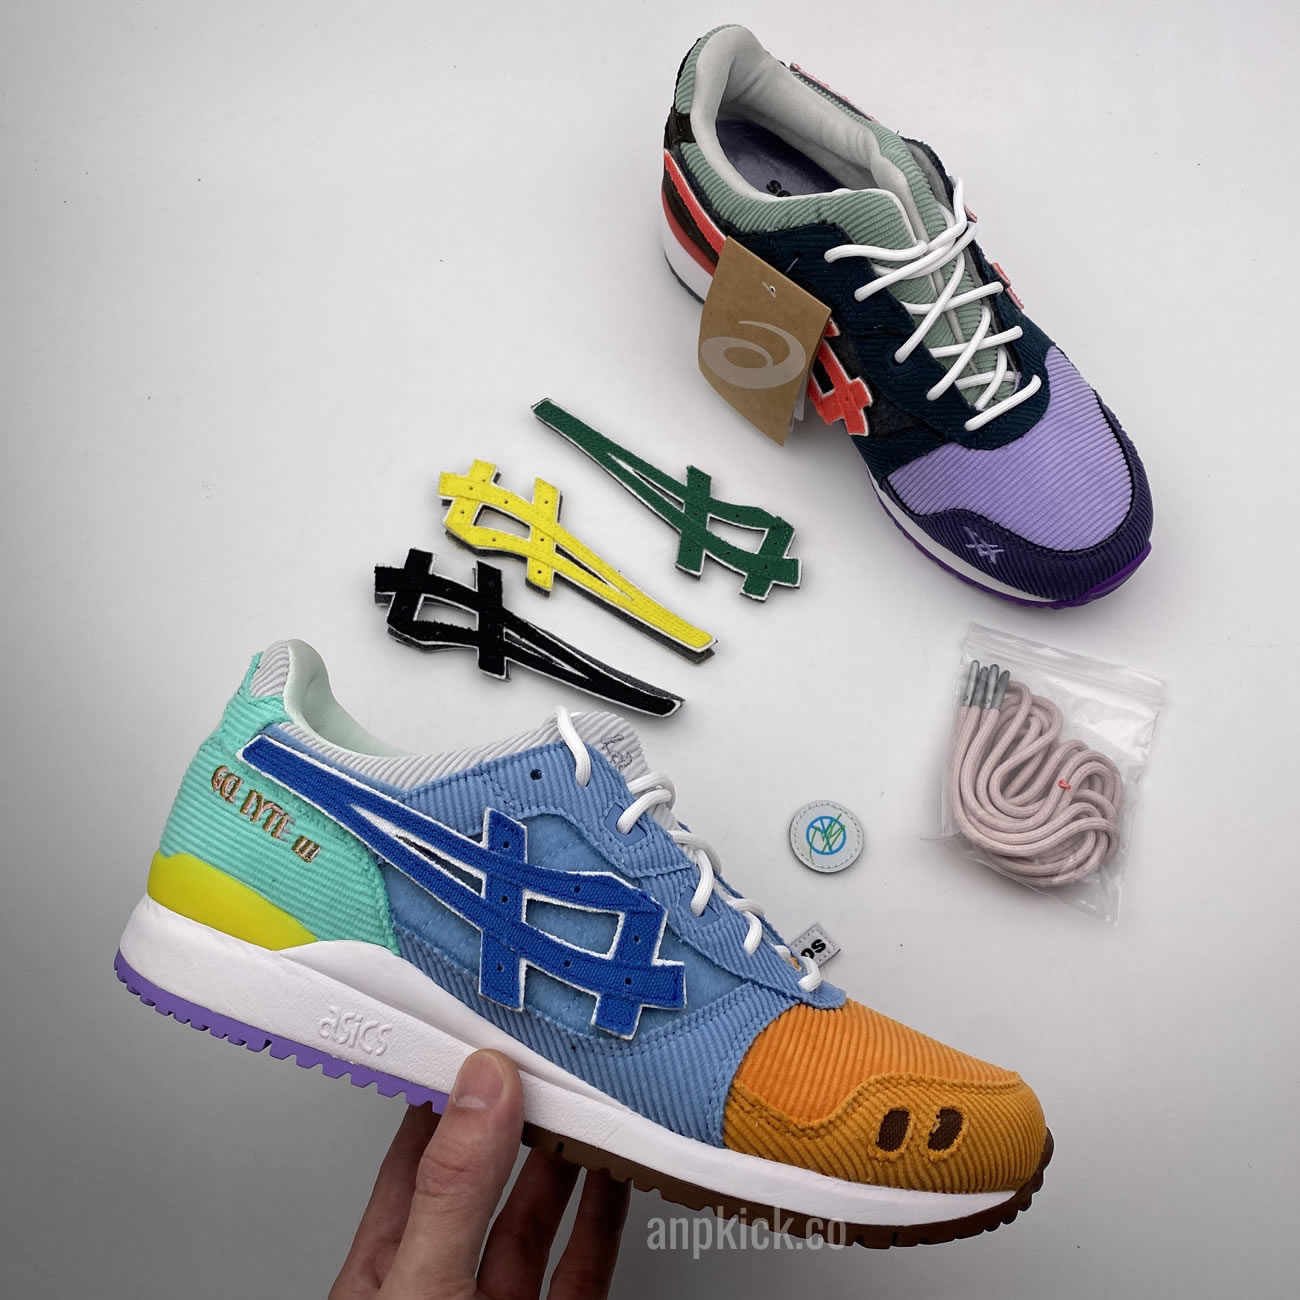 Sean Wotherspoon Atmos Asics Gel Lyte Og Shoes Multi 1203a019 000 (8) - newkick.org